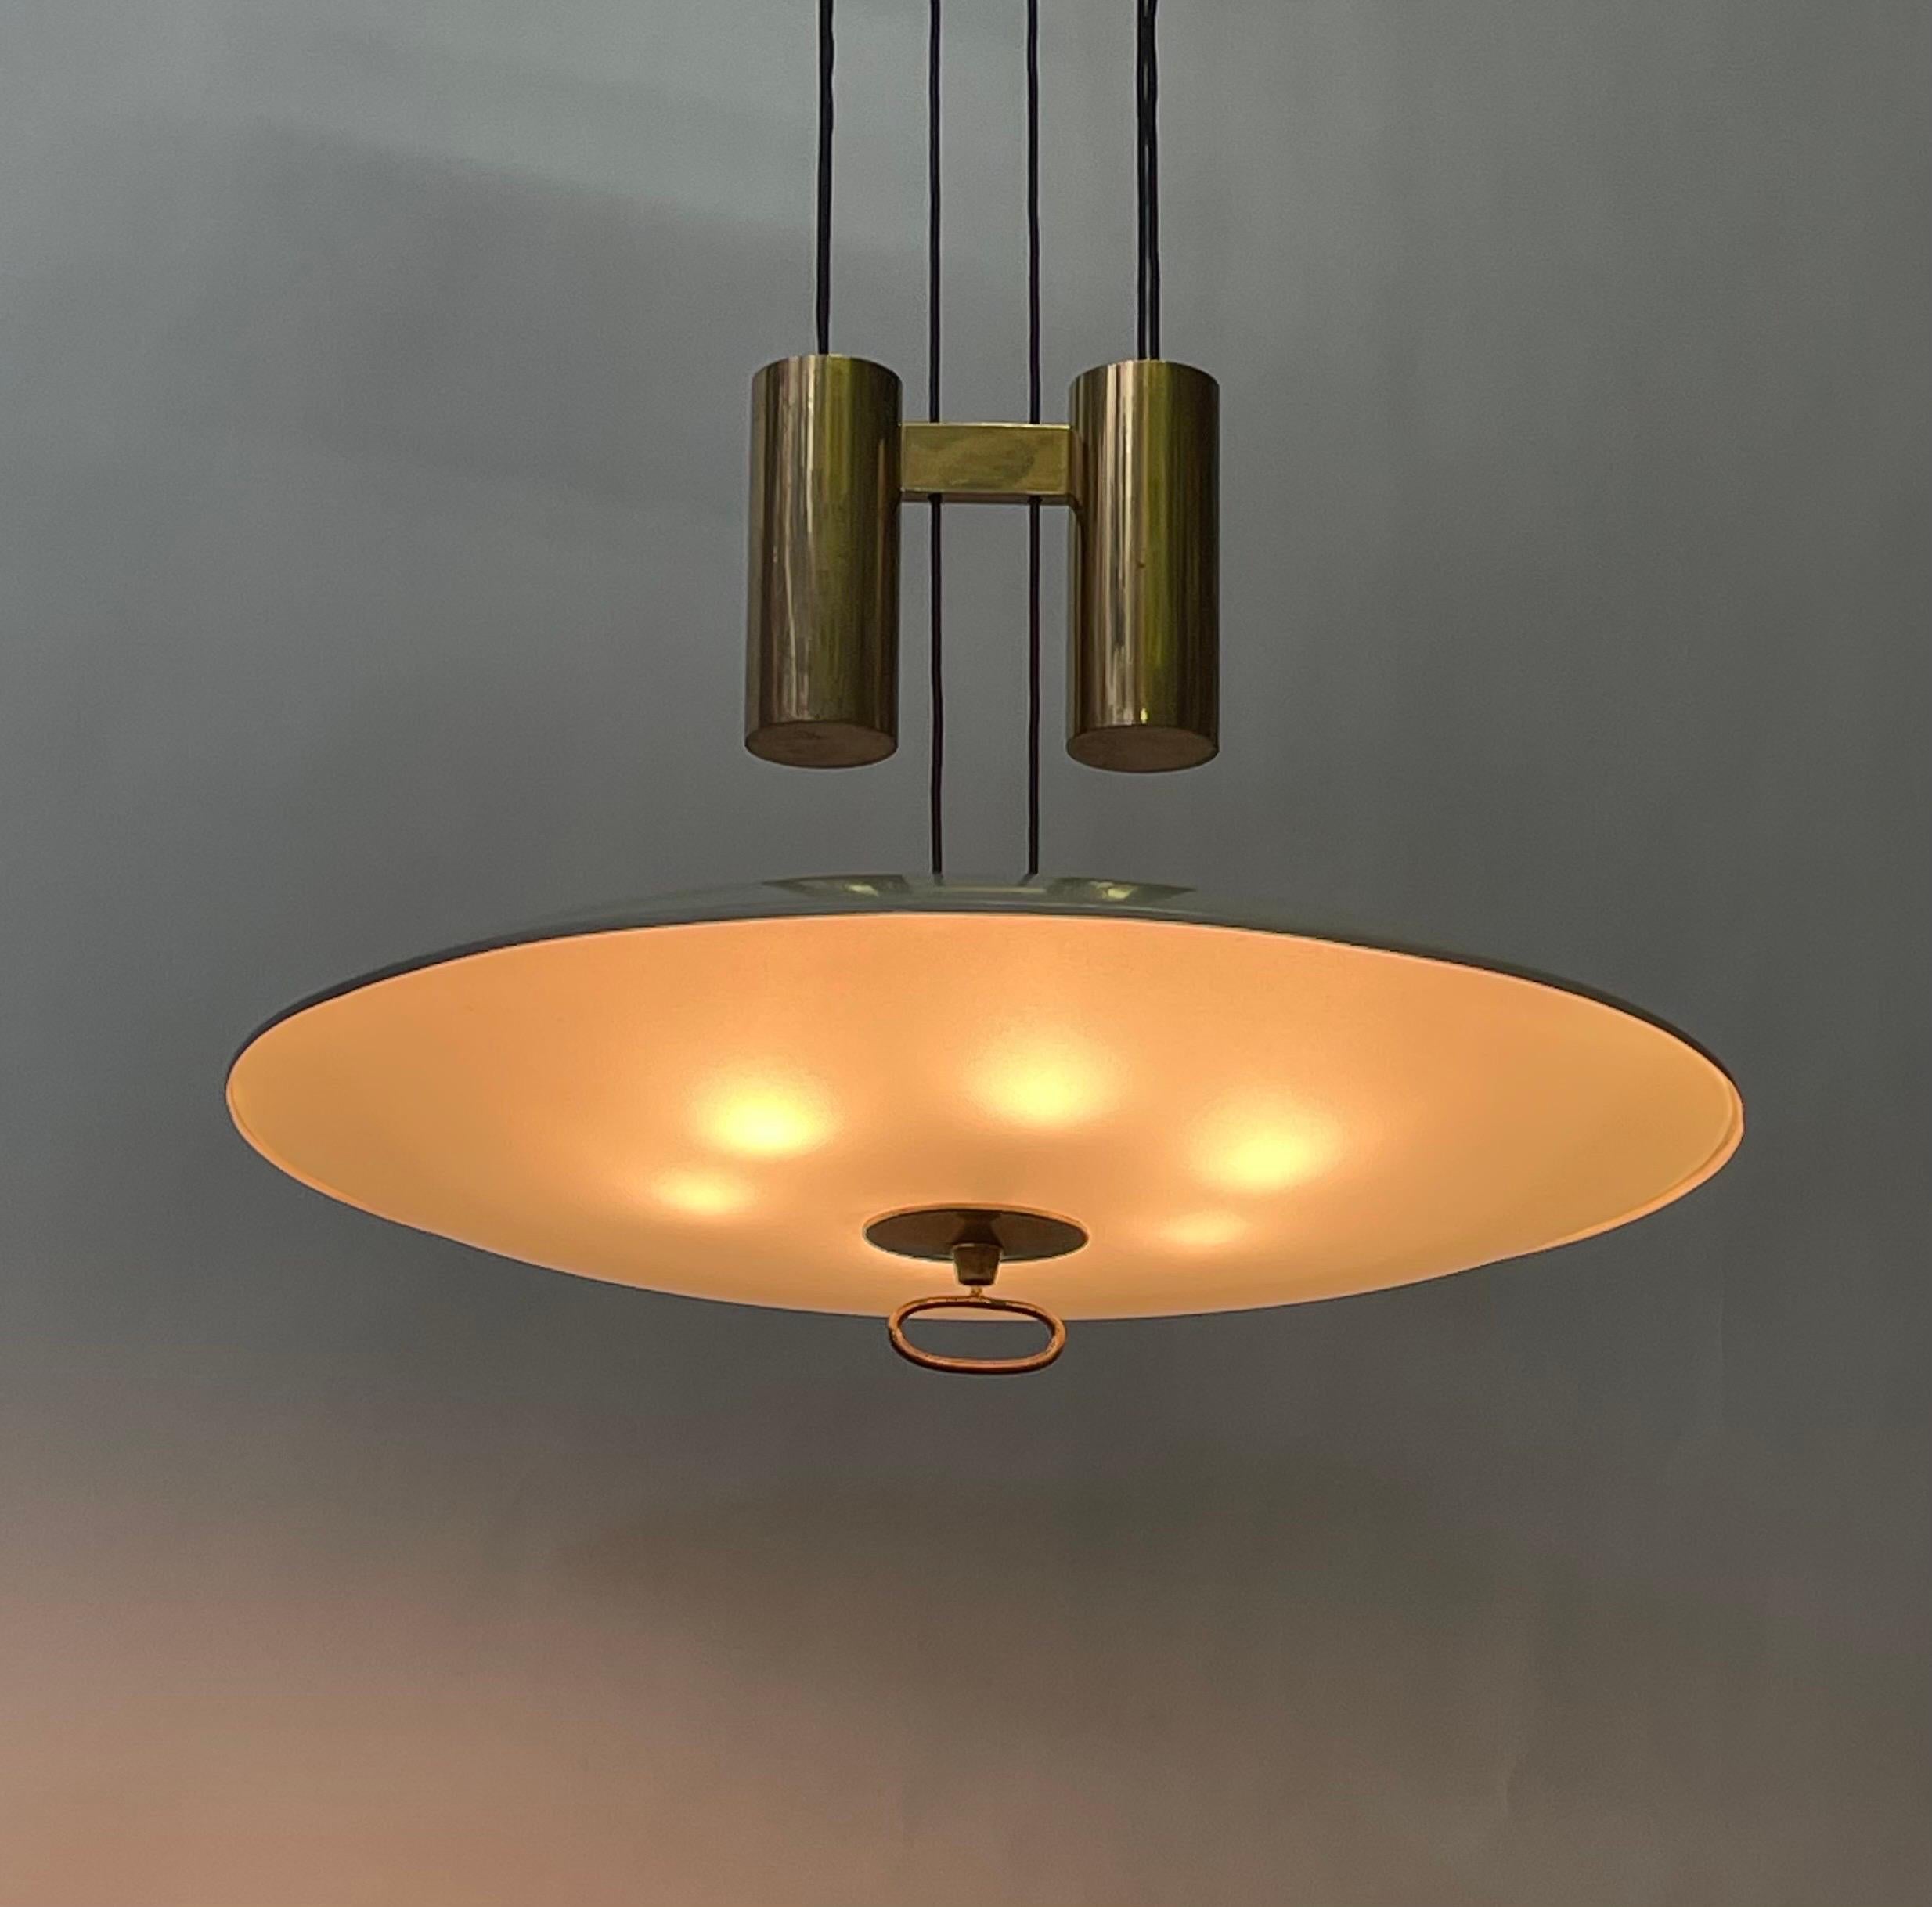 Polished Rare Suspension Lamp Mod.1953 by Max Ingrand for Fontana Arte, Italy circa 1950s